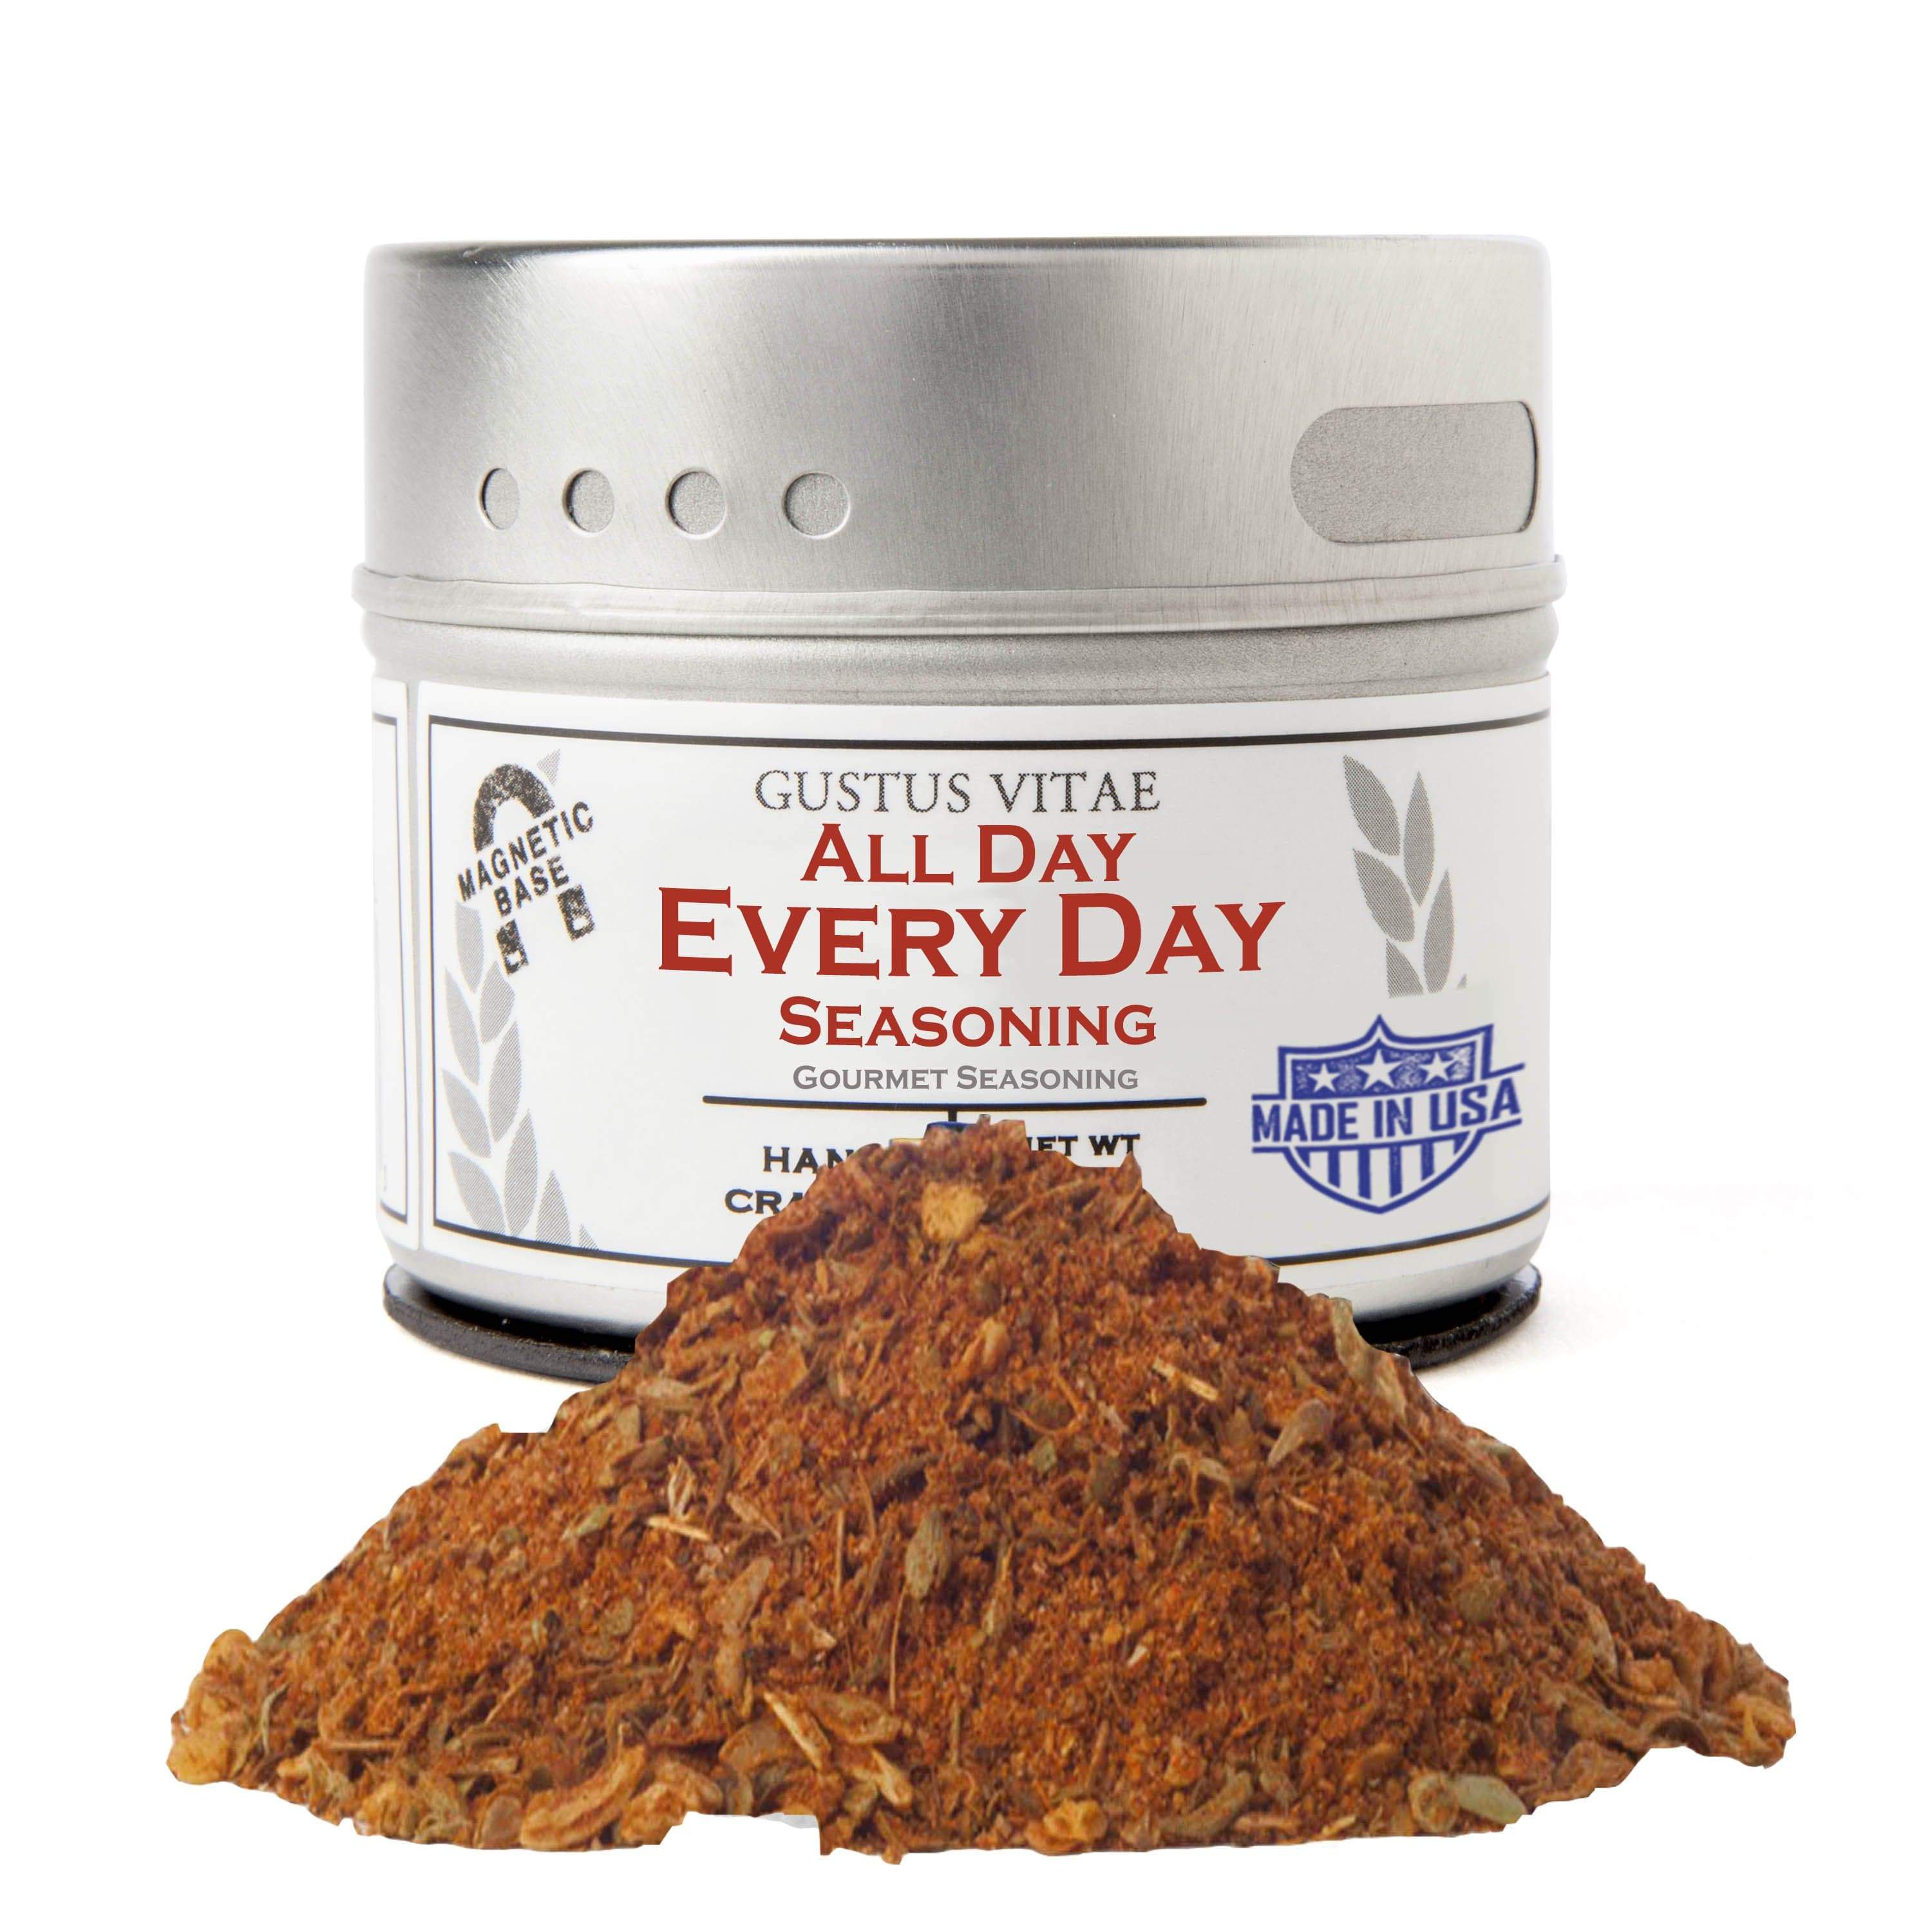 NEW: Our Seasoning Blends Take Everyday Cooking to Another Level, Stories